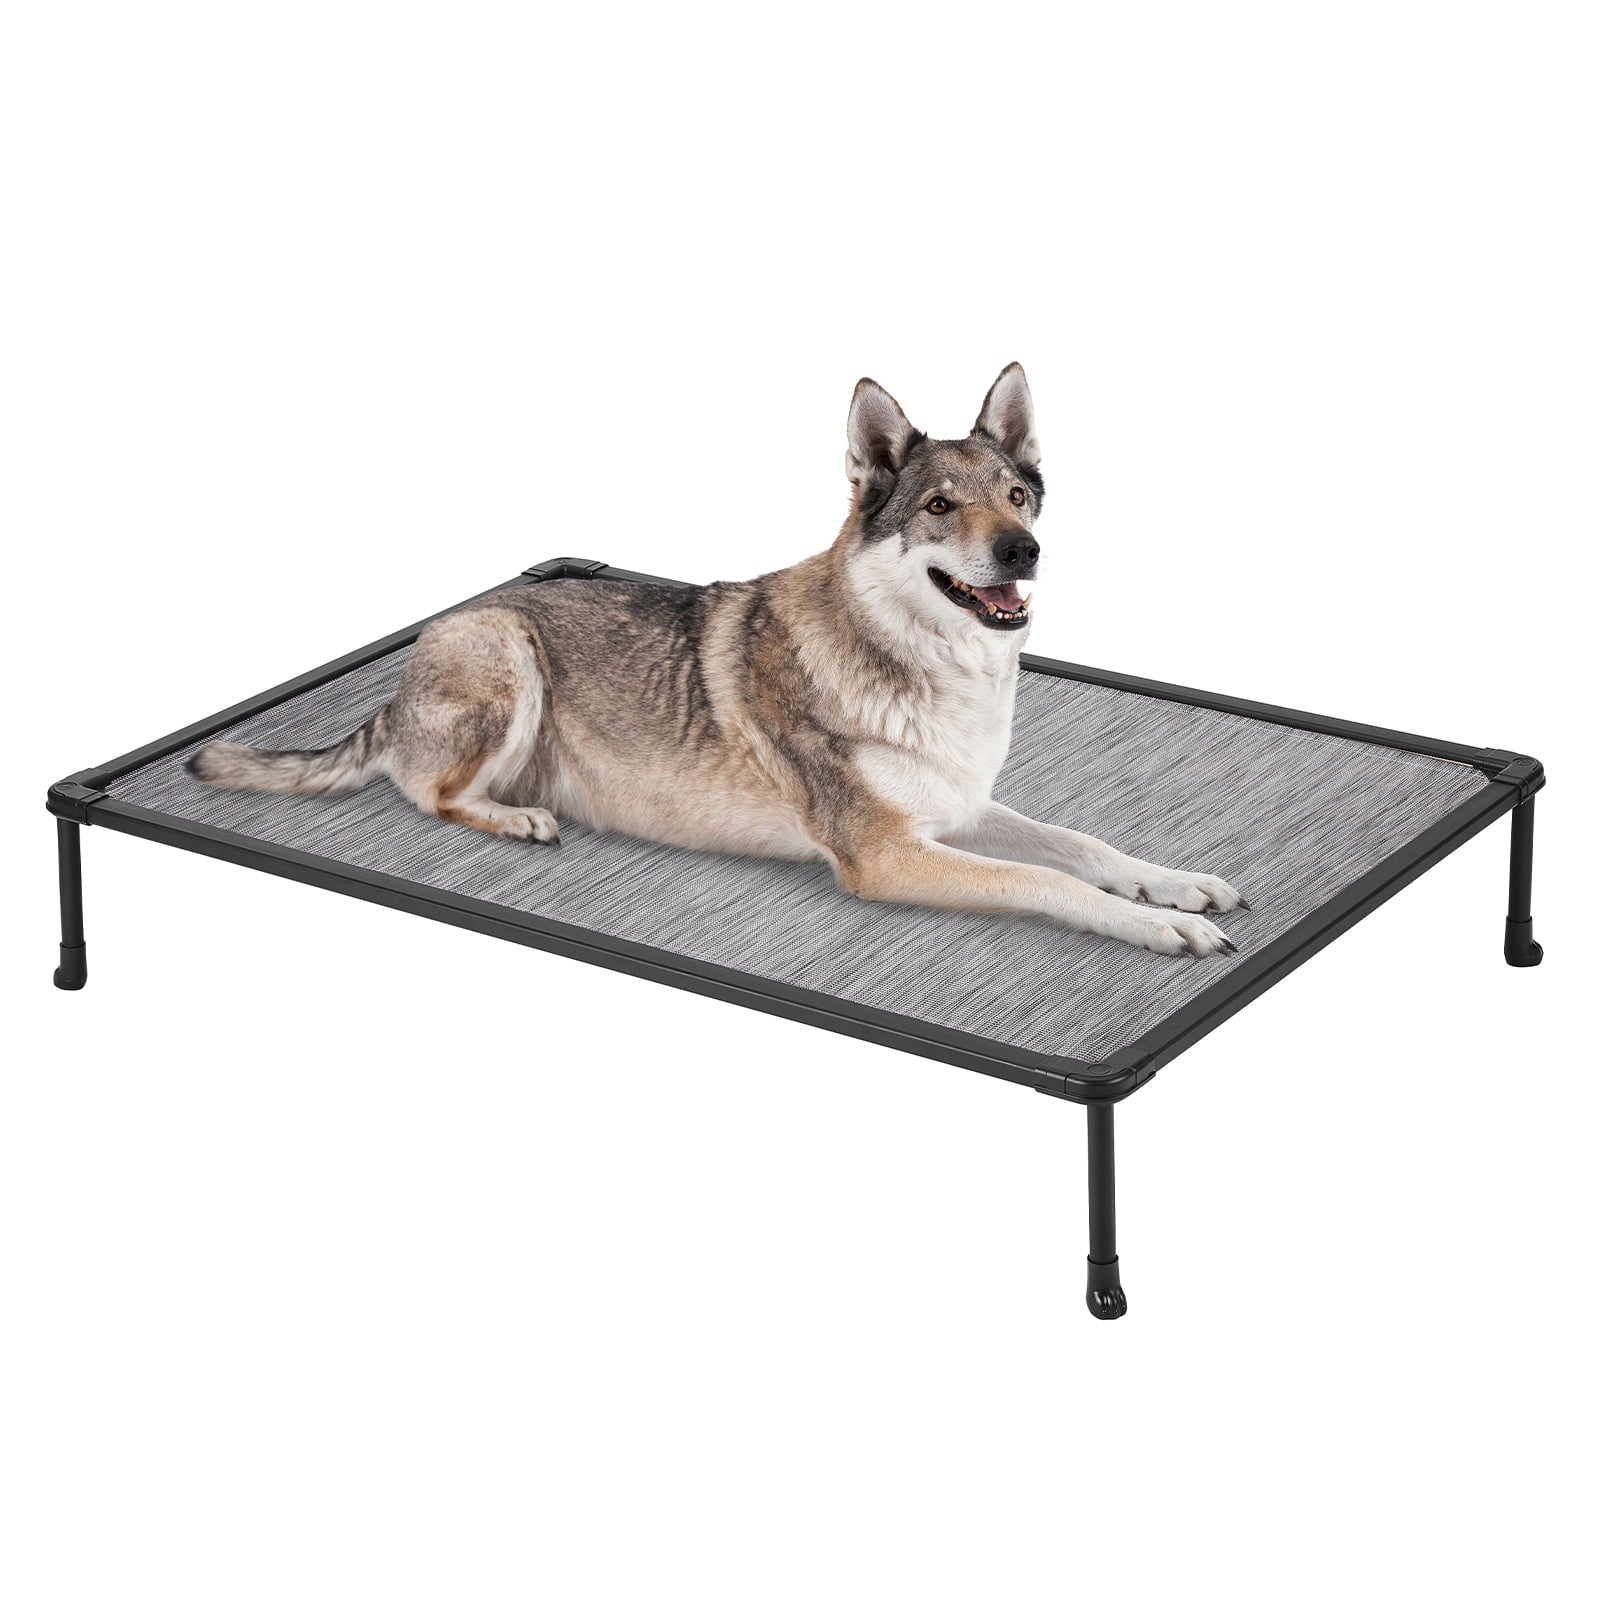 Veehoo Chewproof Dog Bed， Cooling Raised Dog Cots with Black Metal Frame， X Large， Black Silver